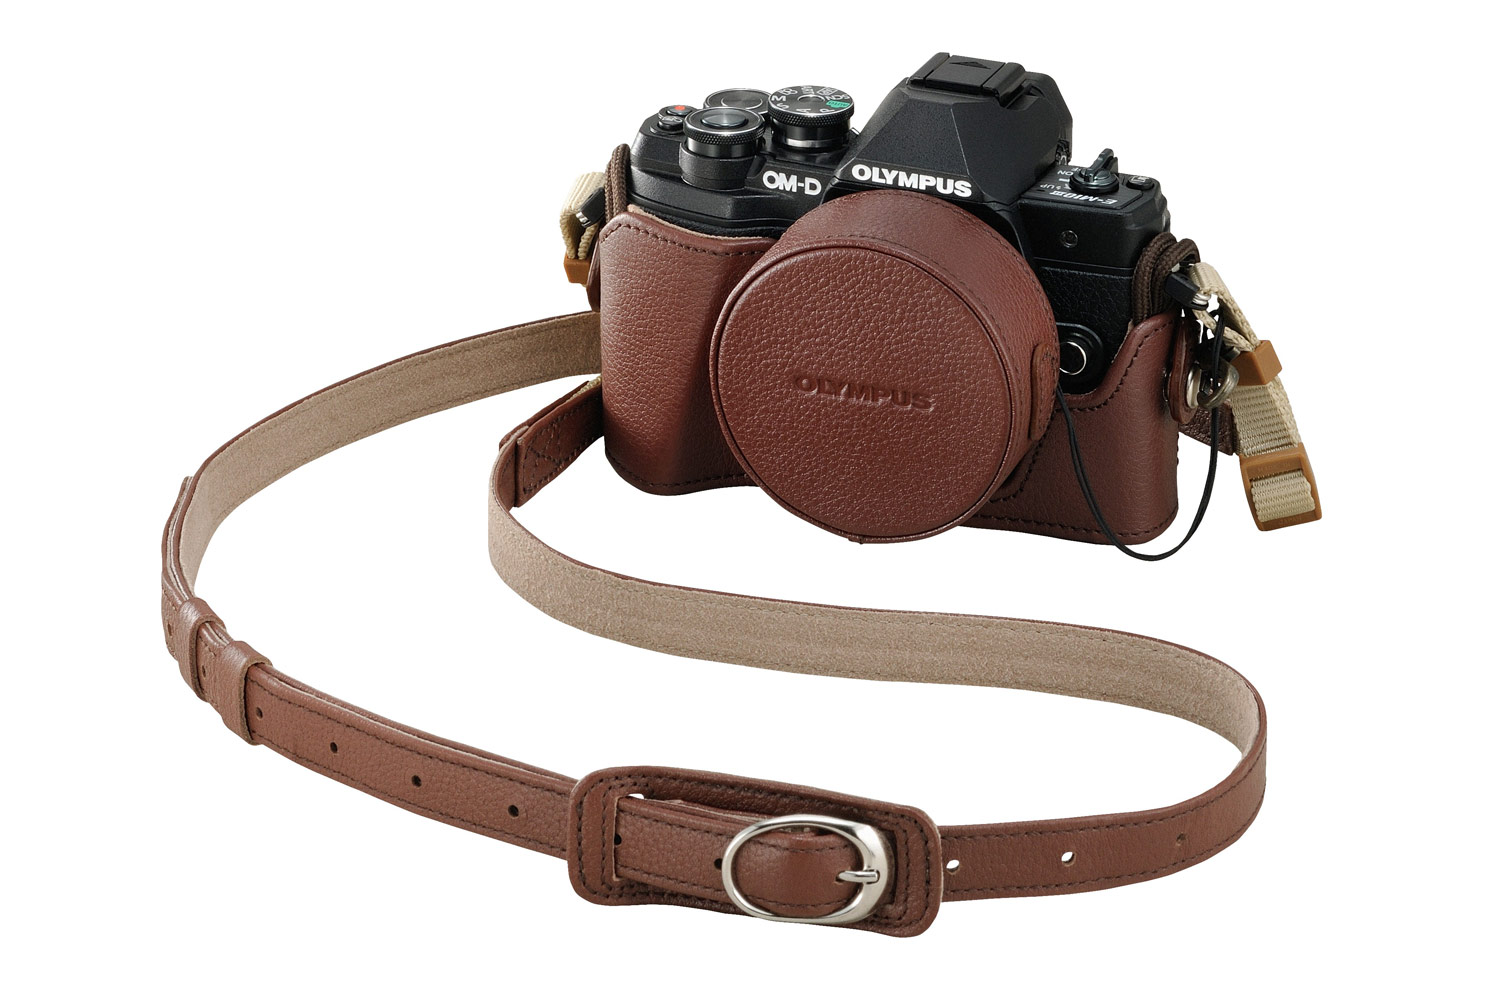 Olympus OM-D E-M10 Mark III black in brown leather case